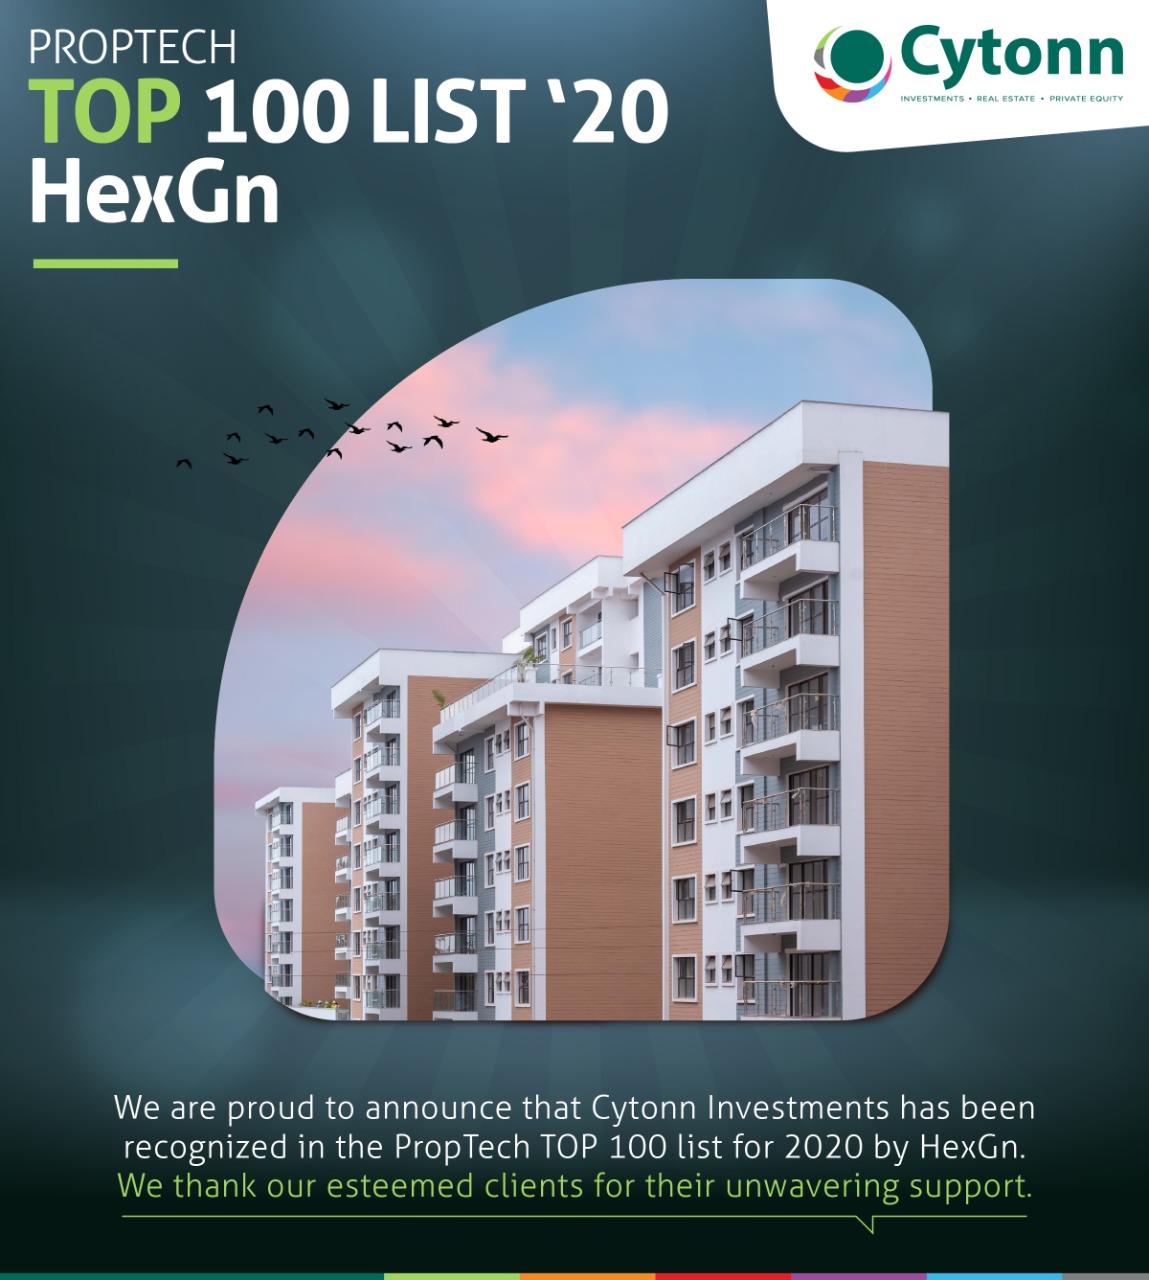 cytonn-investments-recognized-among-proptech-top-100-list-2020-by-hexgn